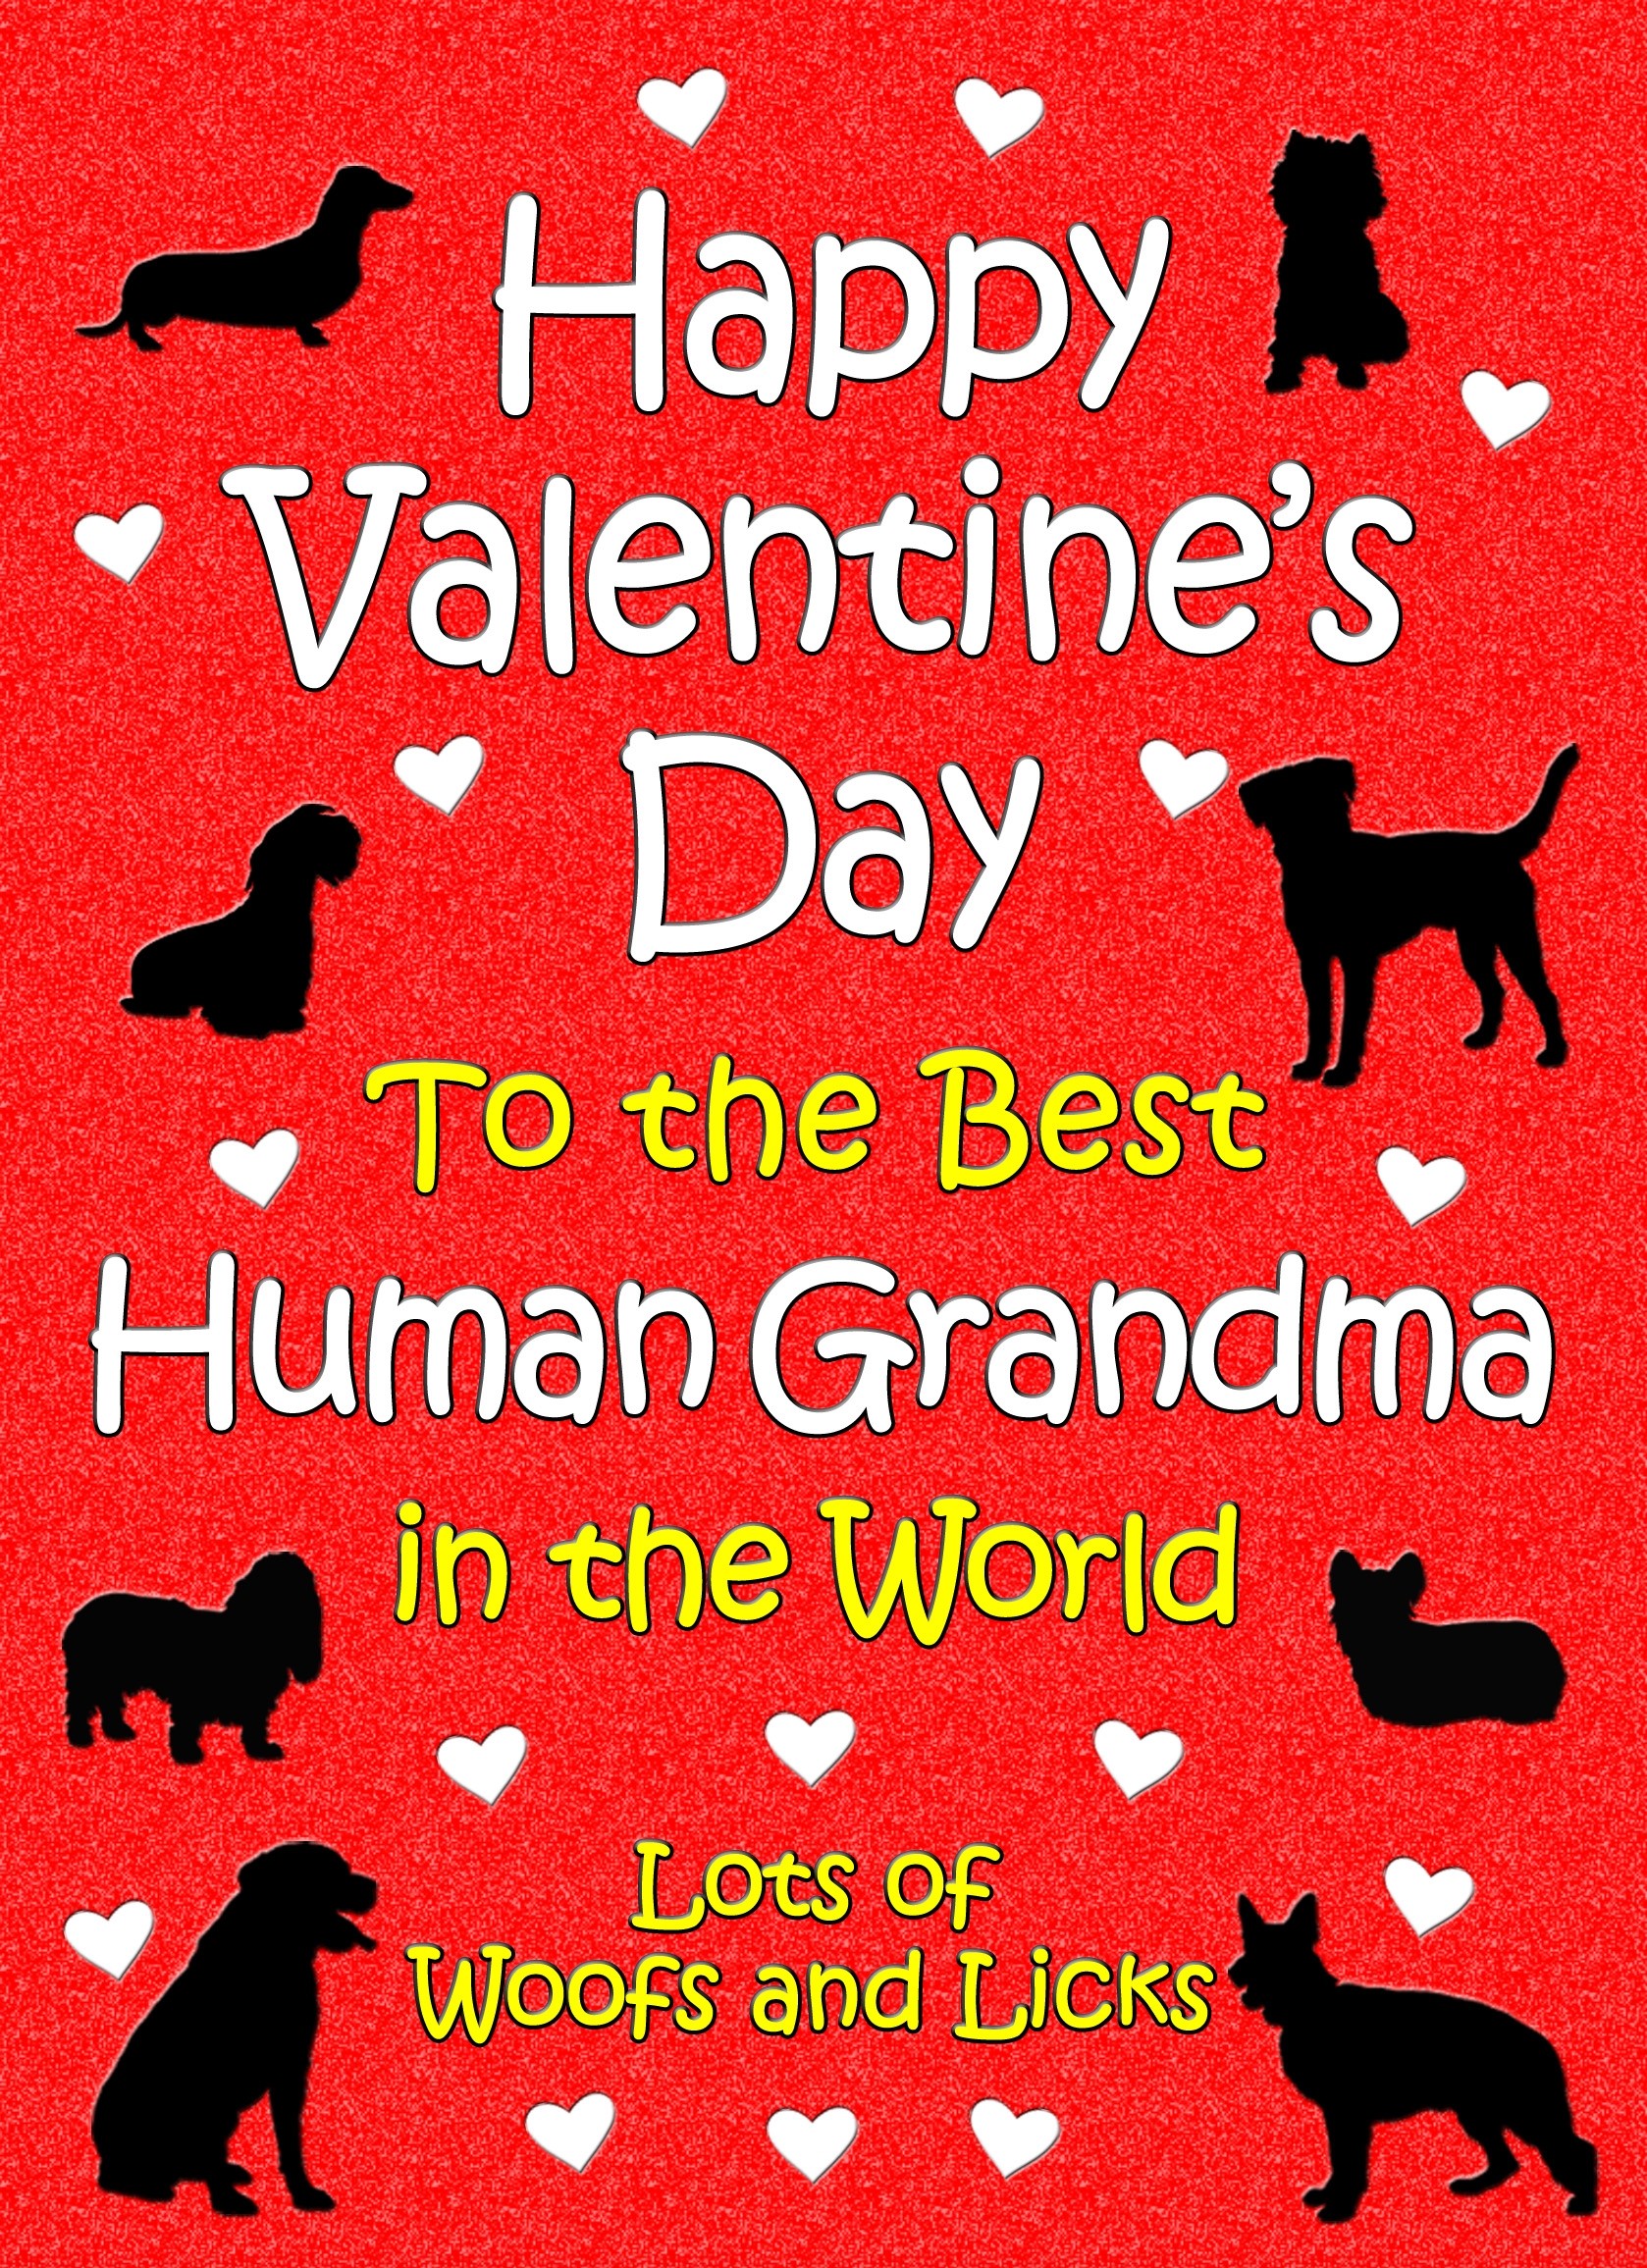 From The Dog Valentines Day Card (Human Grandma)